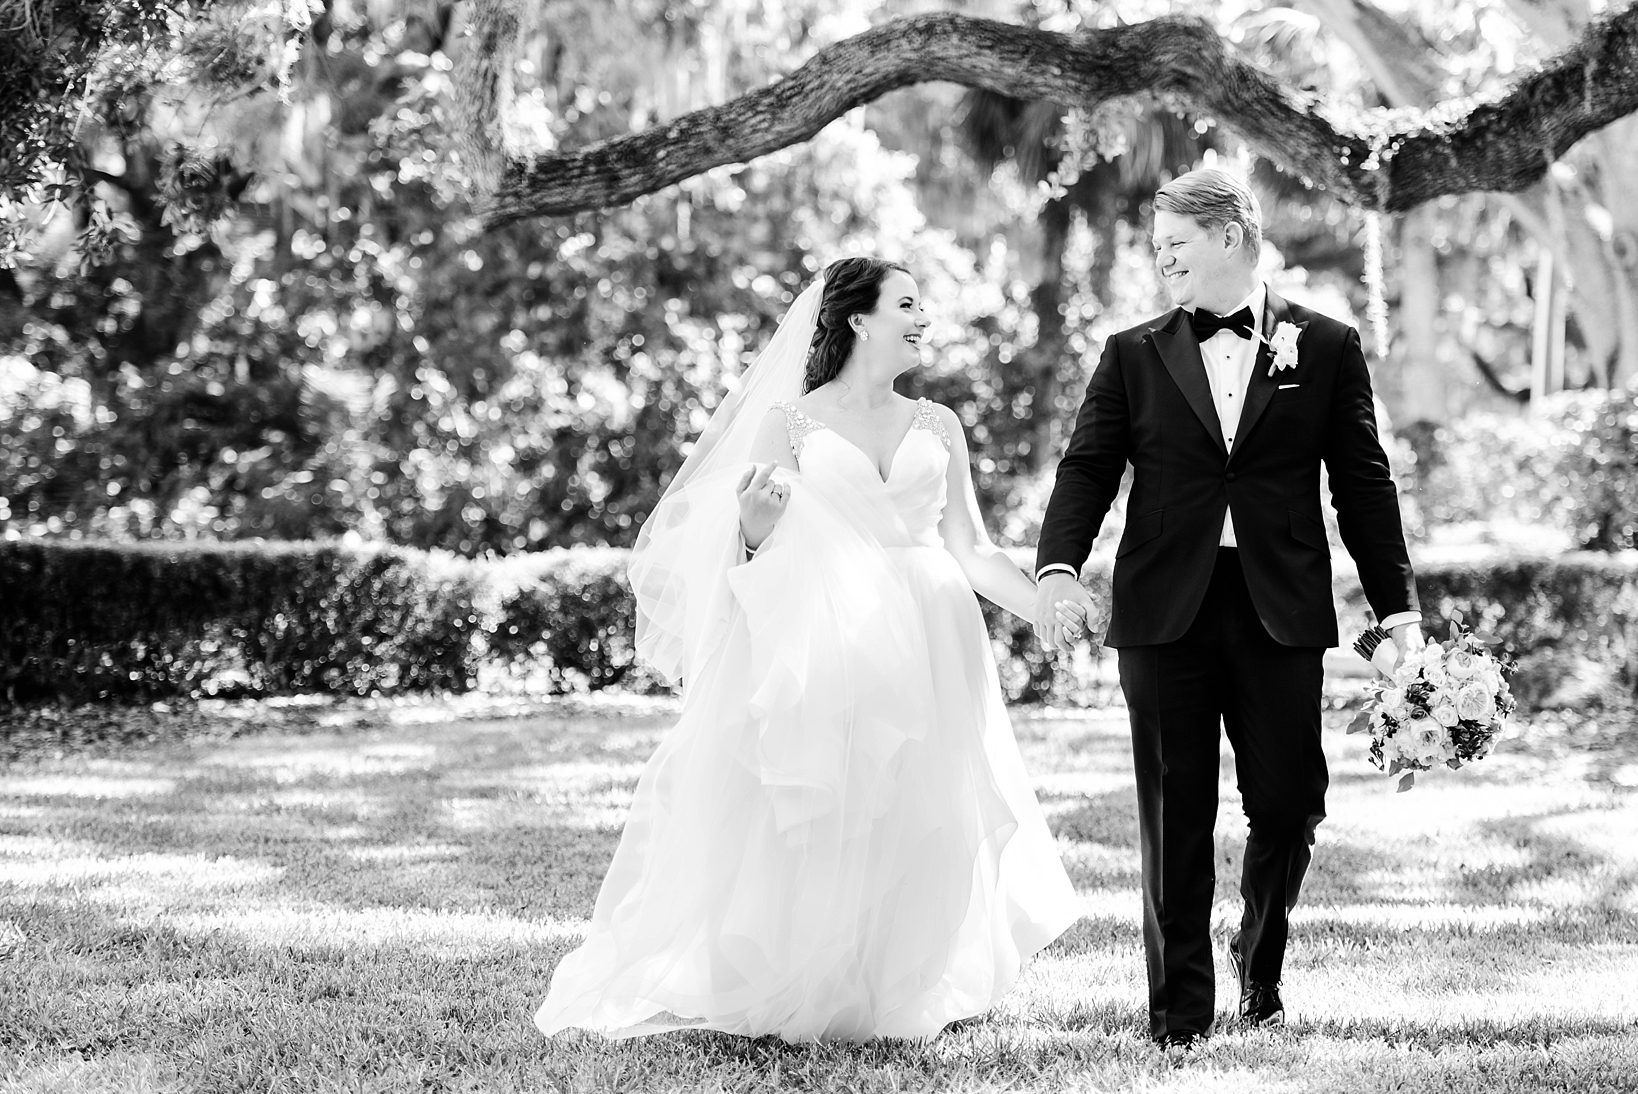 Timeless image of a Bride and Groom laughing under the oak trees on their wedding day by Sarah & Ben Photography